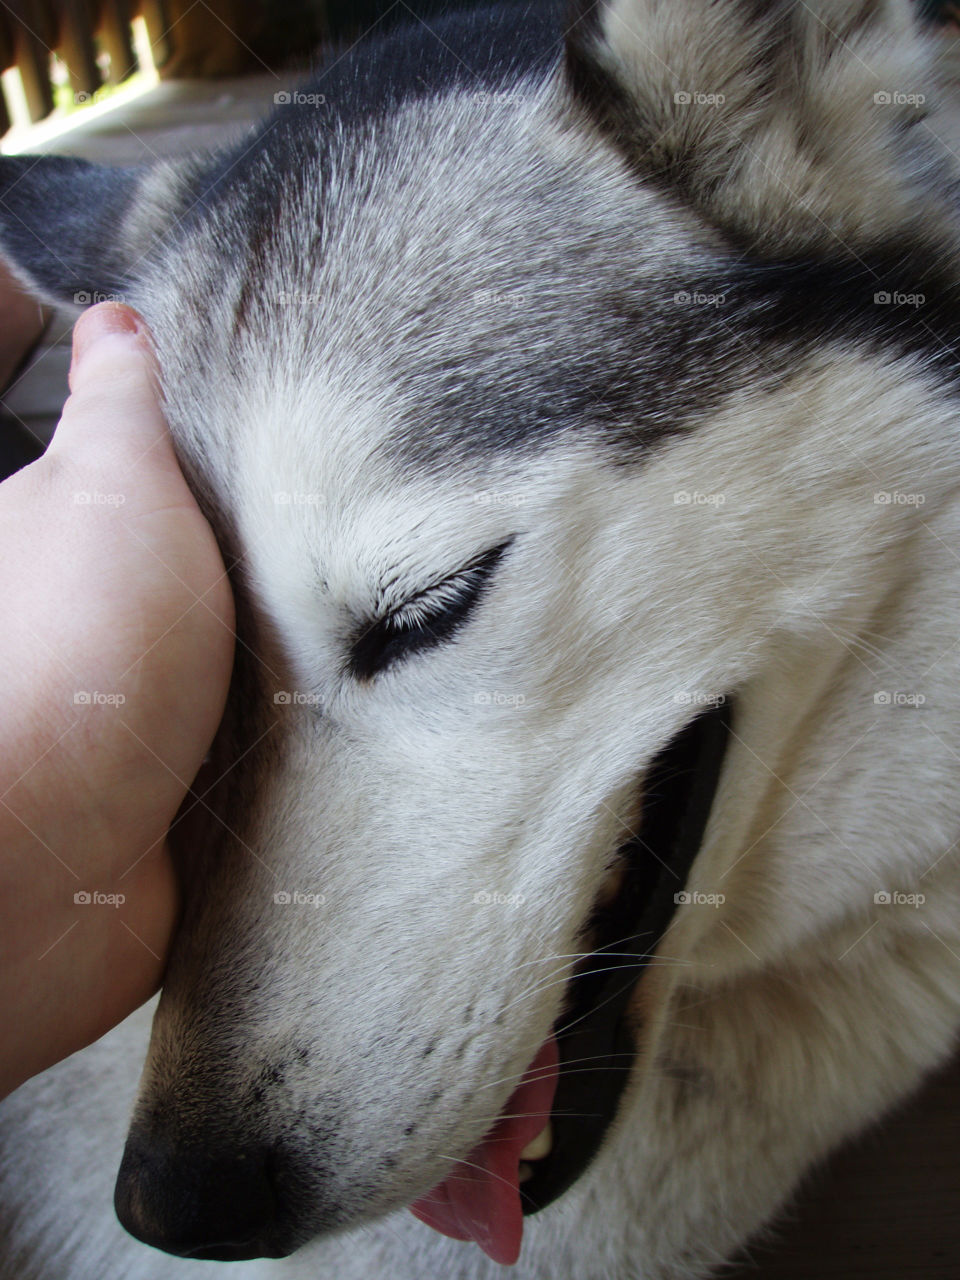 This Malamute loves getting pets!